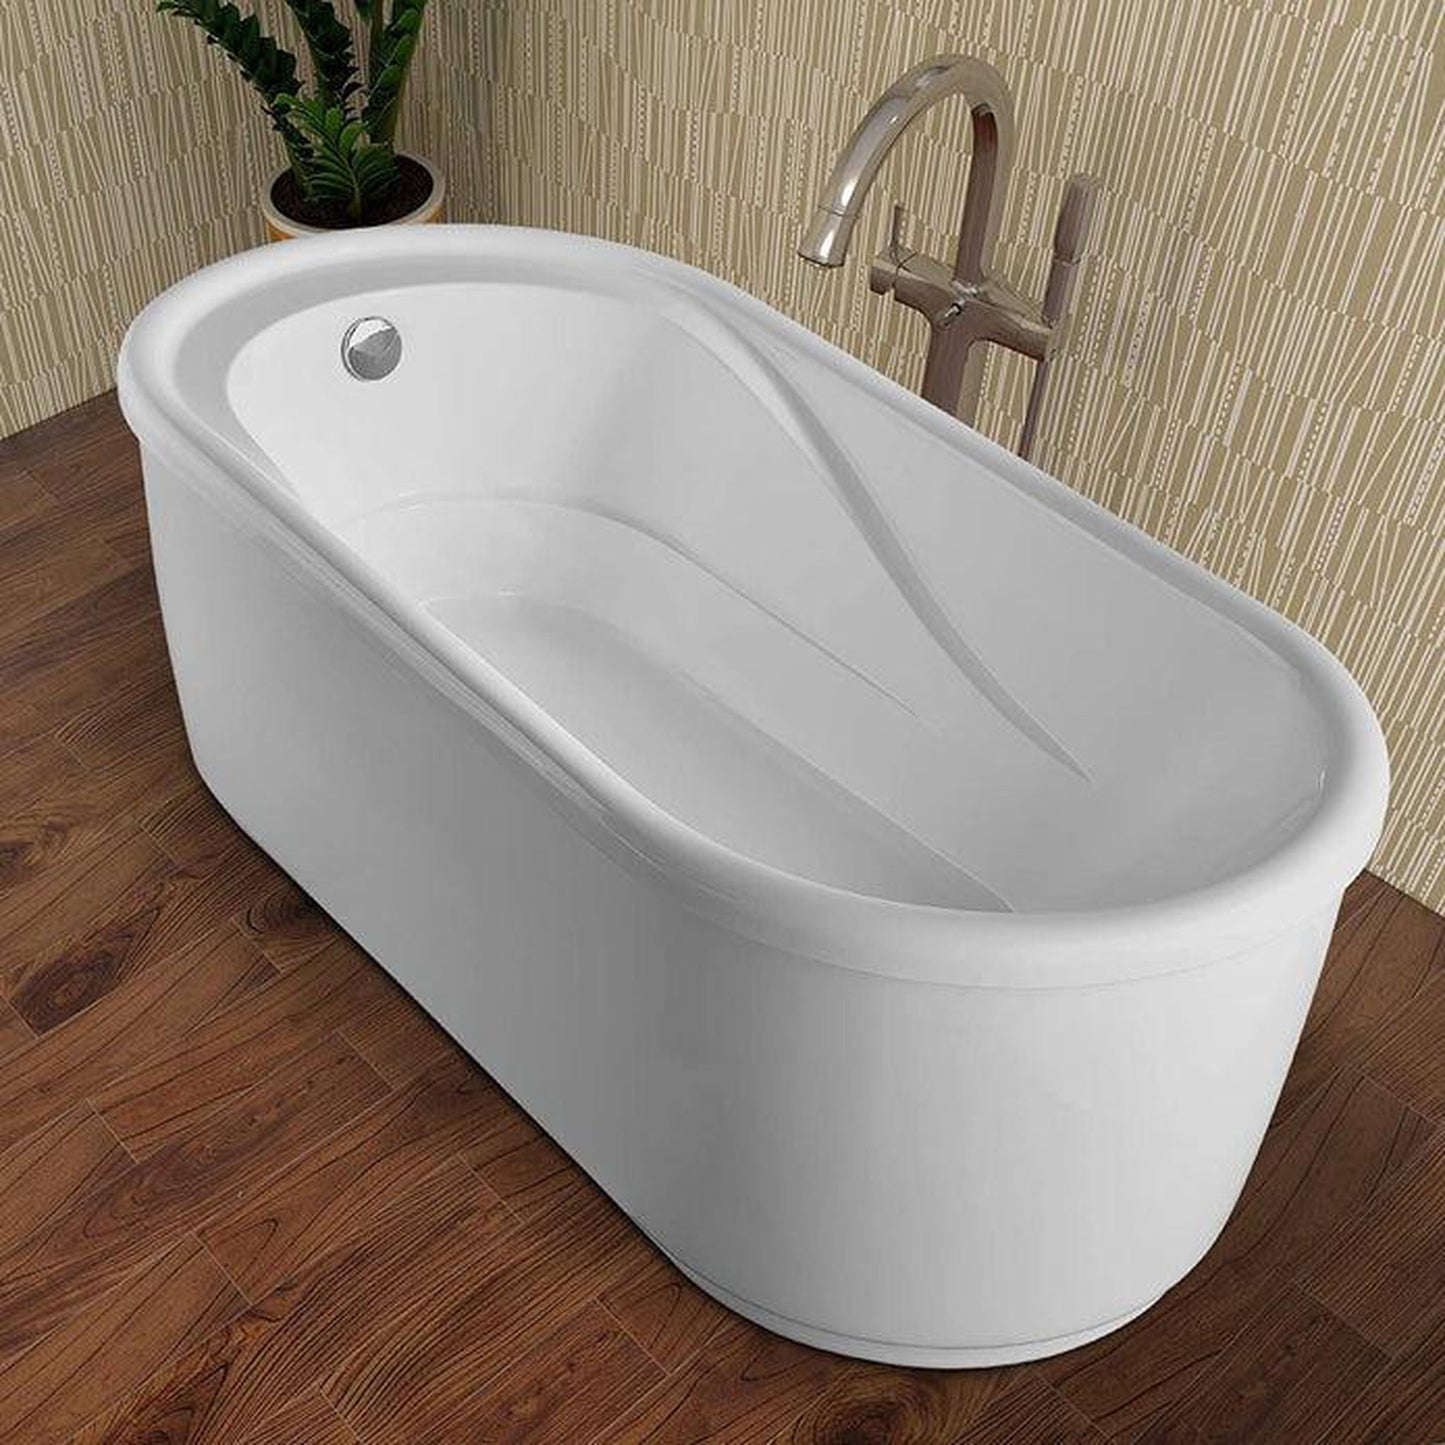 Vanity Art 59" W x 23" H White Acrylic Freestanding Bathtub With Polished Chrome Round Overflow and Pop-up Drain